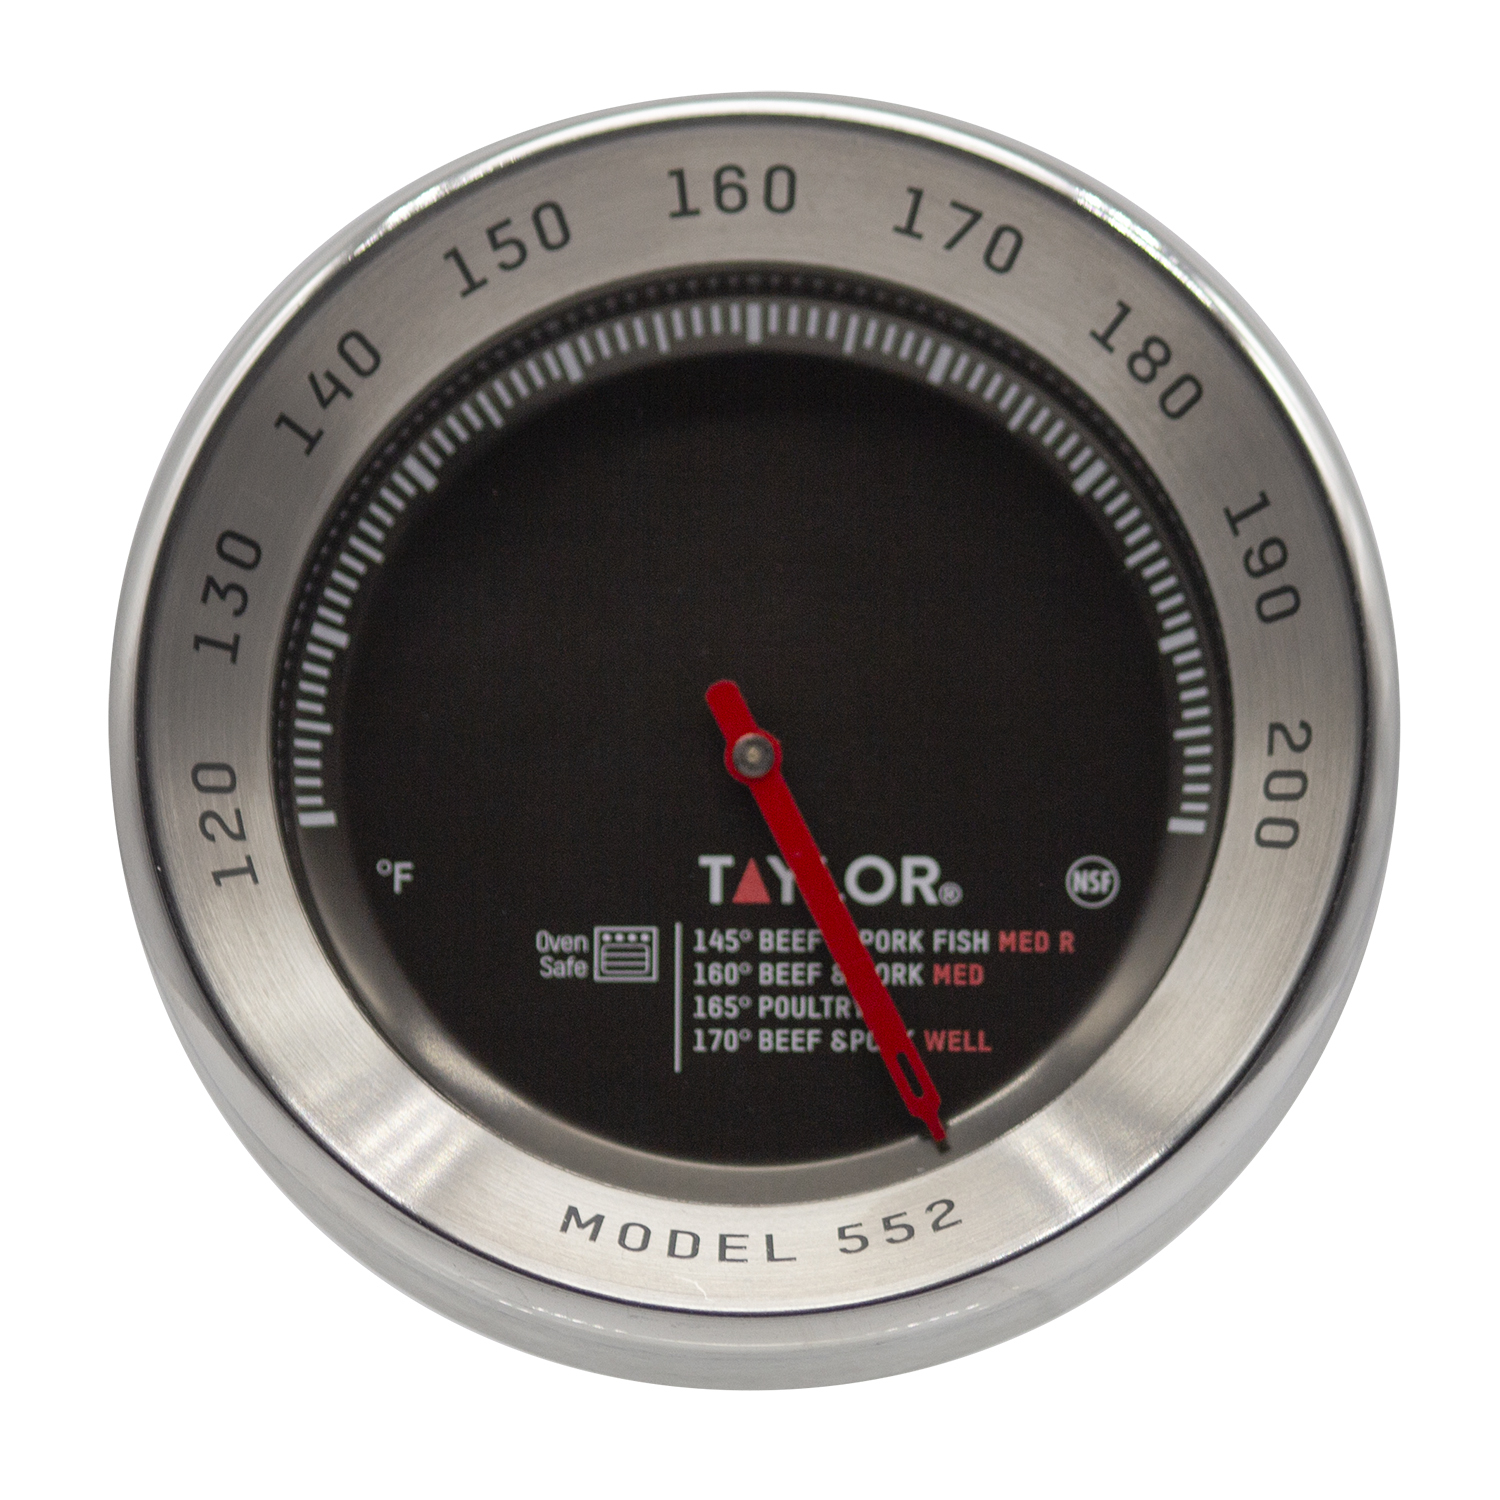 Taylor Thermometer 3Pc Set Includes 1 Super Fast Digital Thermometer and 2  Leave-in Oven-Safe Analog Meat Thermometers 